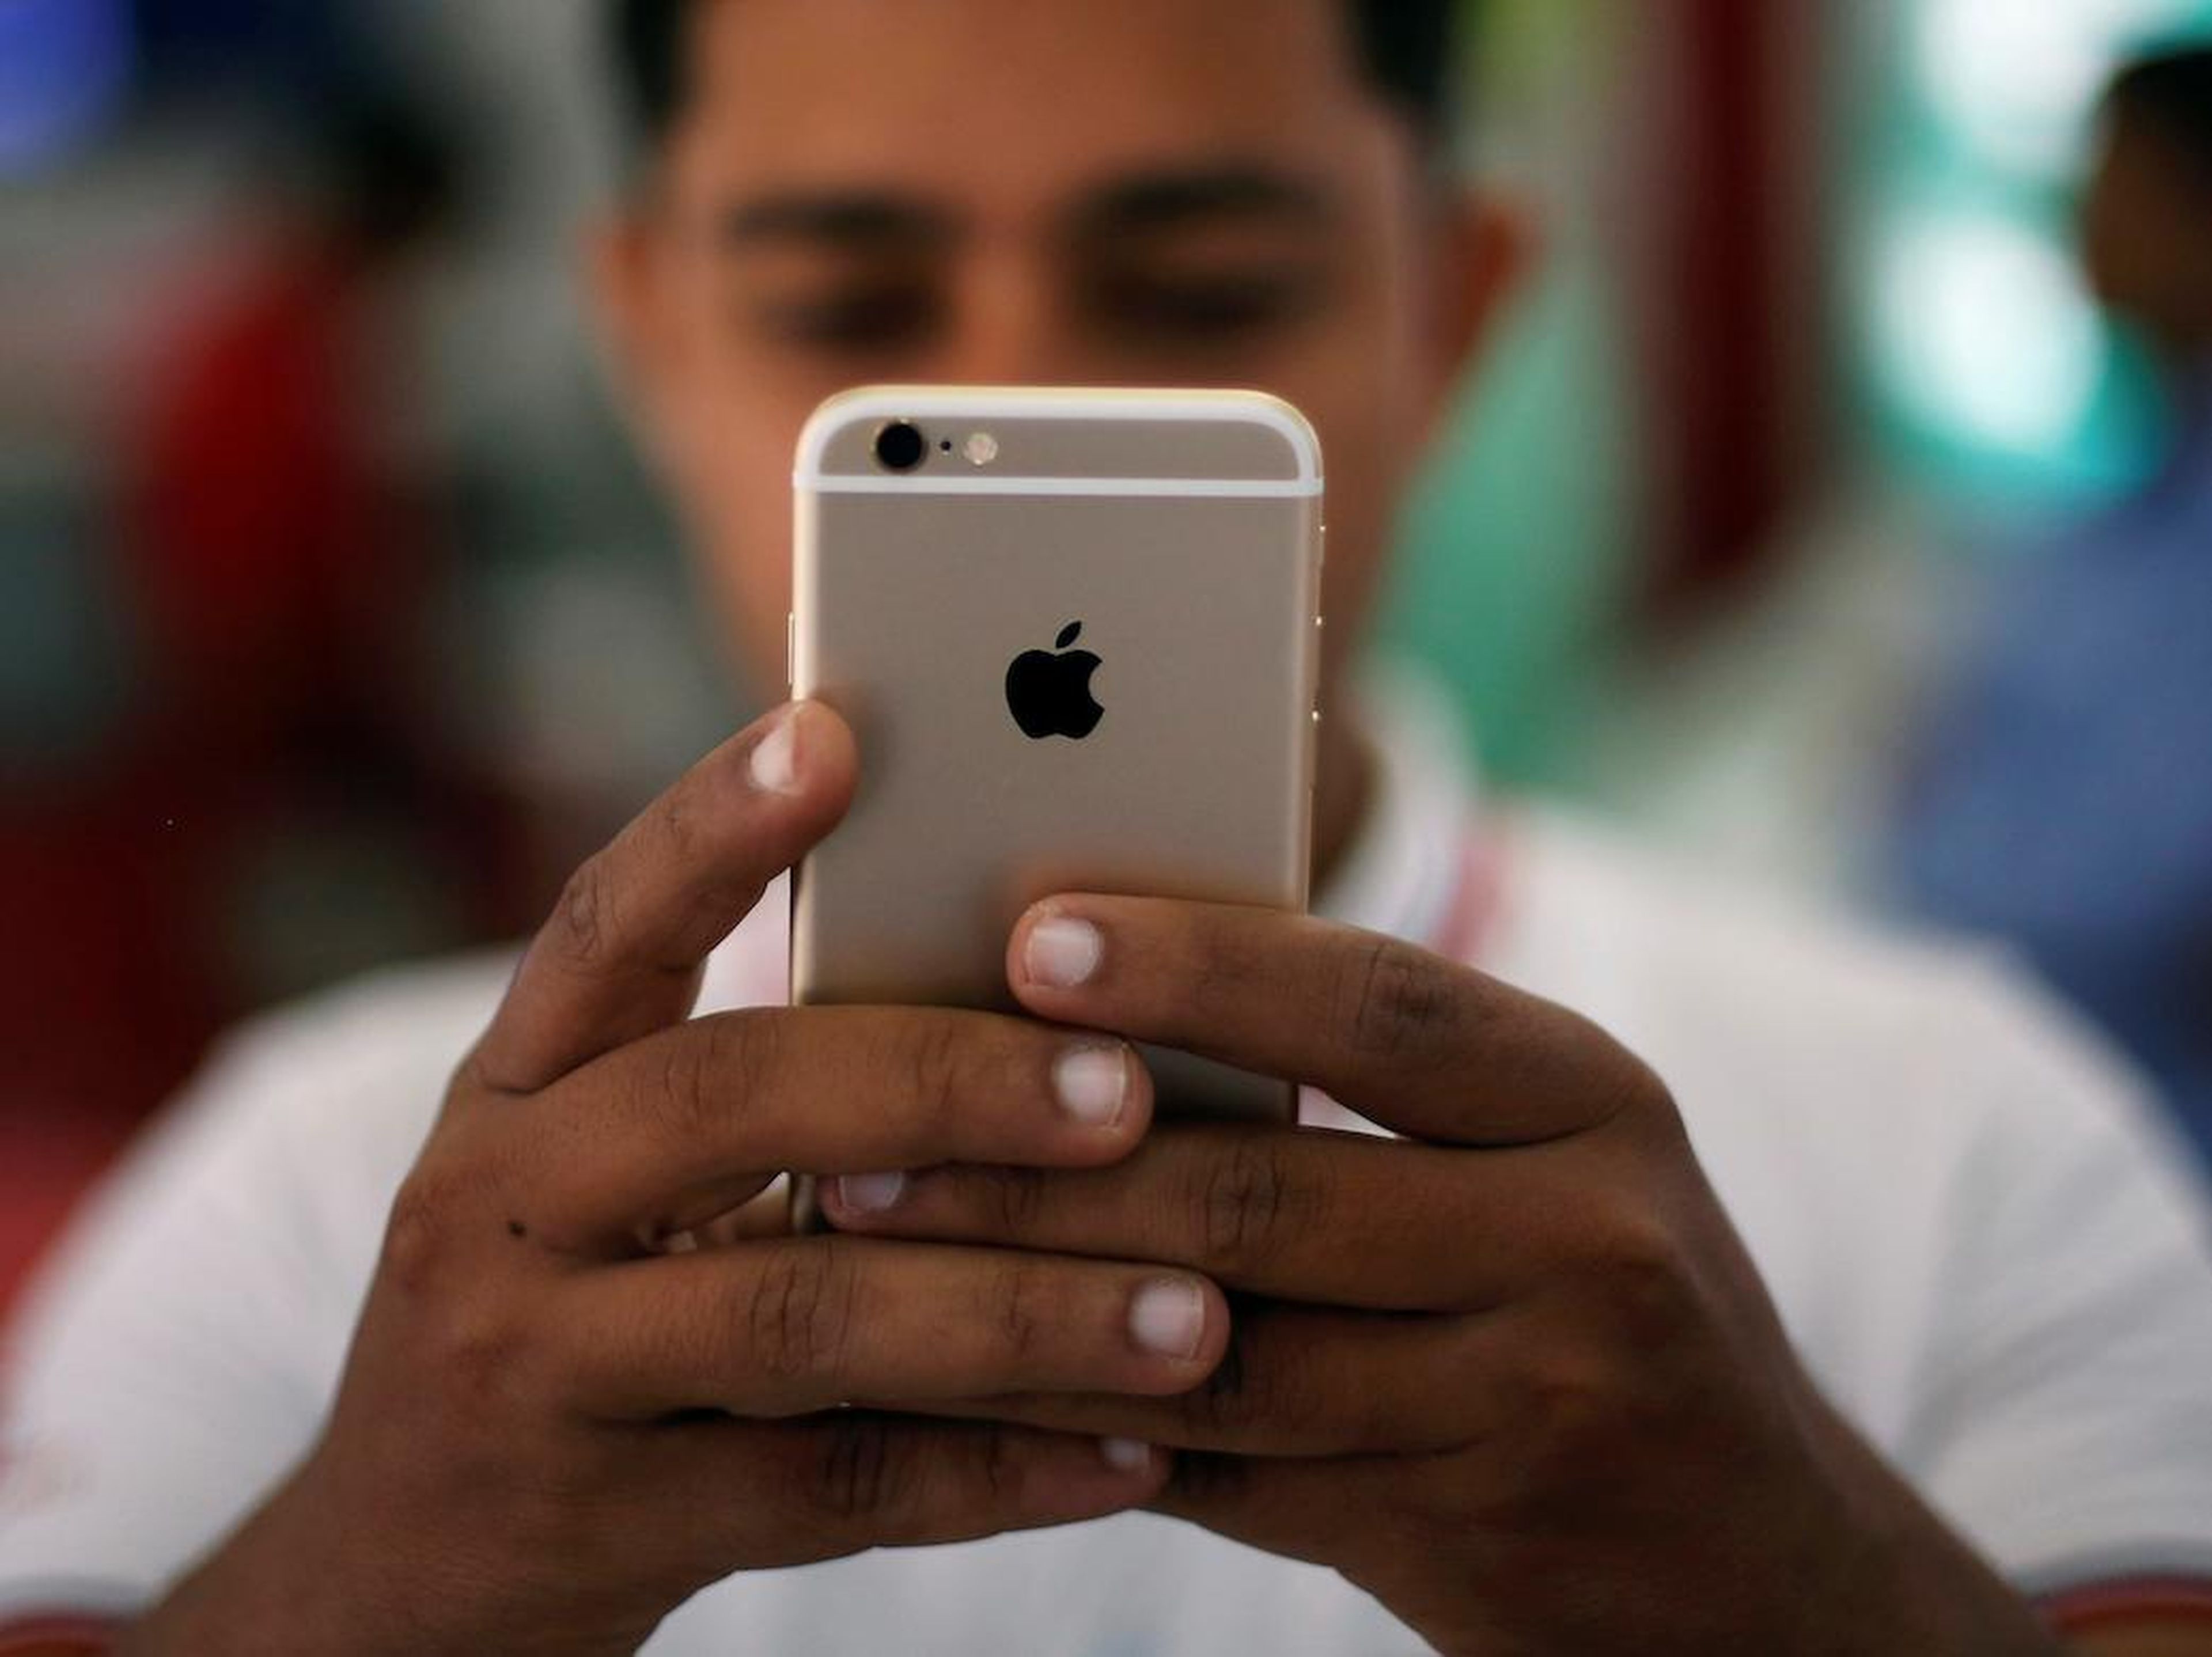 Apple is struggling to sell expensive iPhones in India.